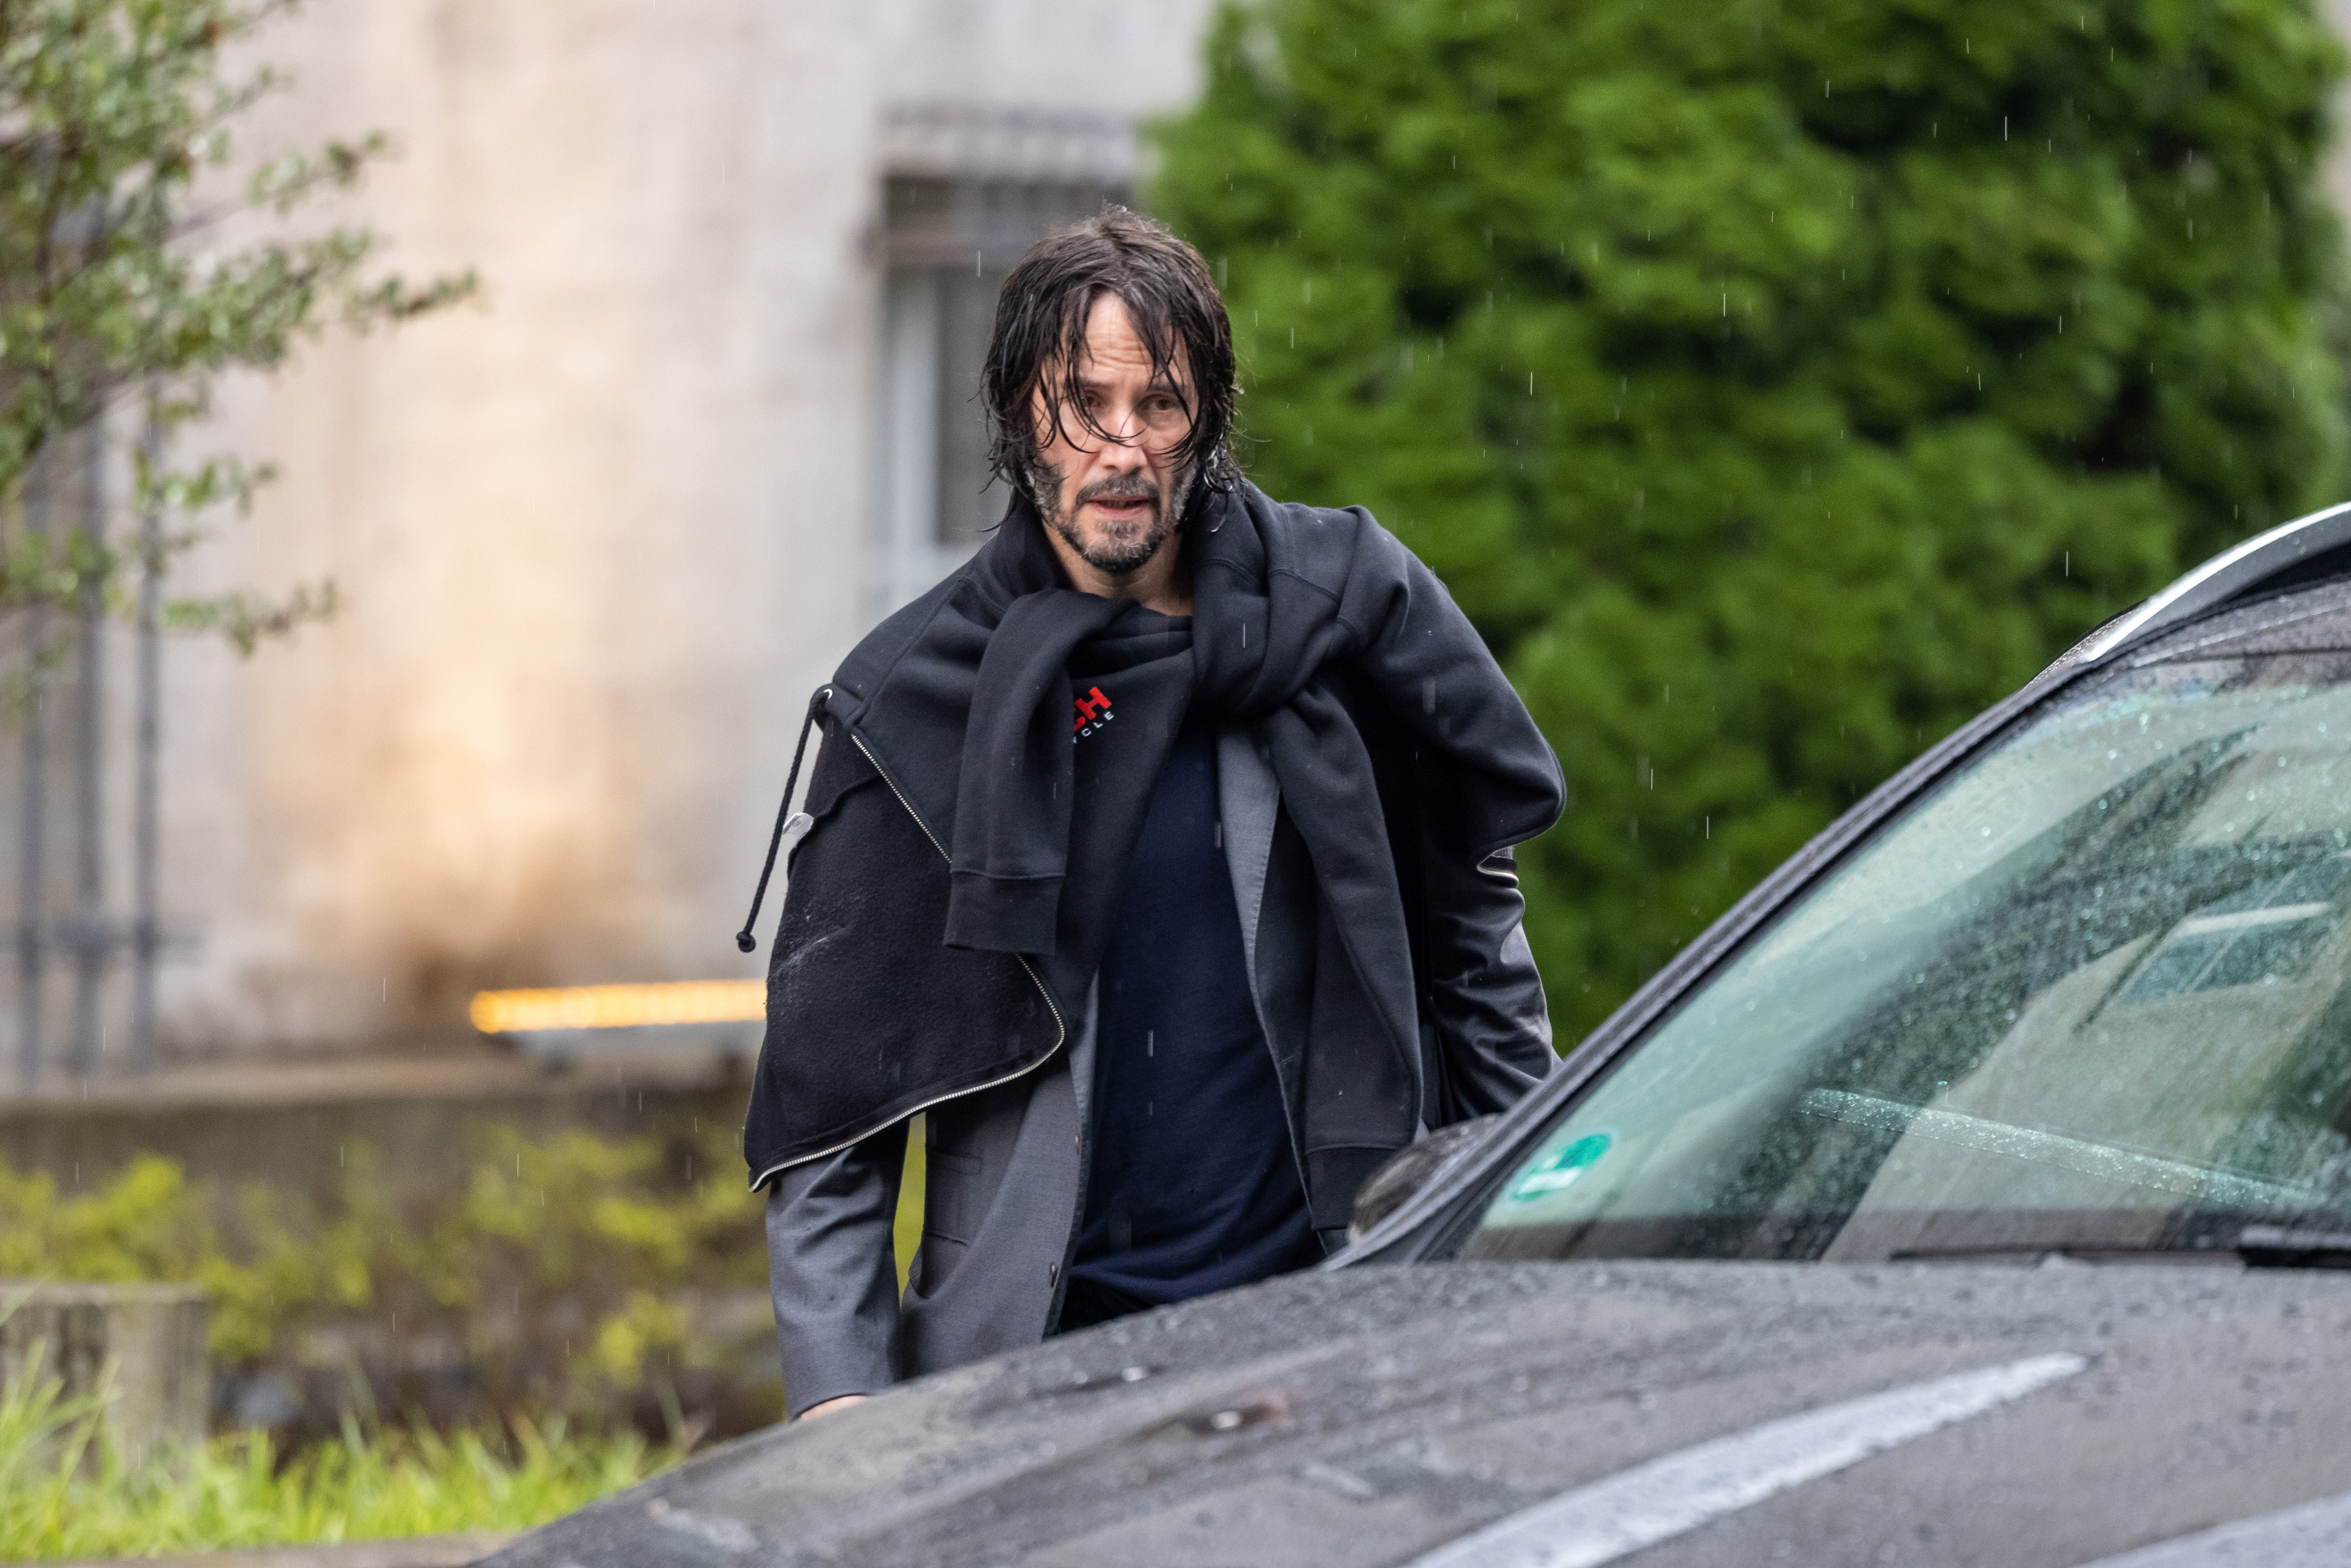 Keanu Reeves spotted out while filming "John Wick: Chapter 4" in Berlin, Germany on August 5, 2021 | Source: Getty Images